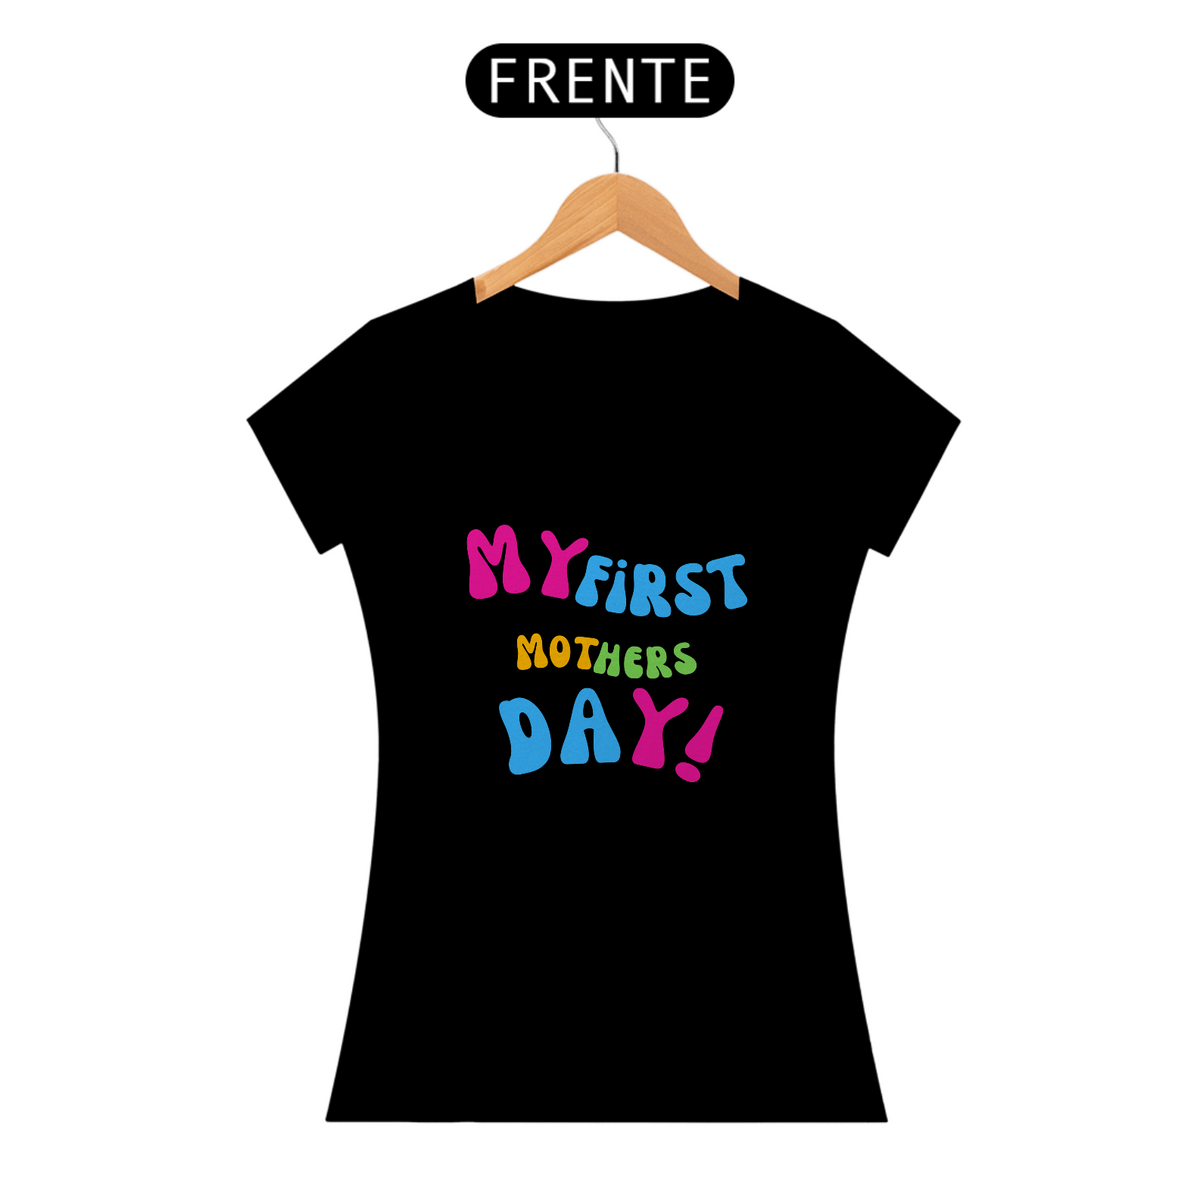 Nome do produto: T-Shirt My First Mothers Day